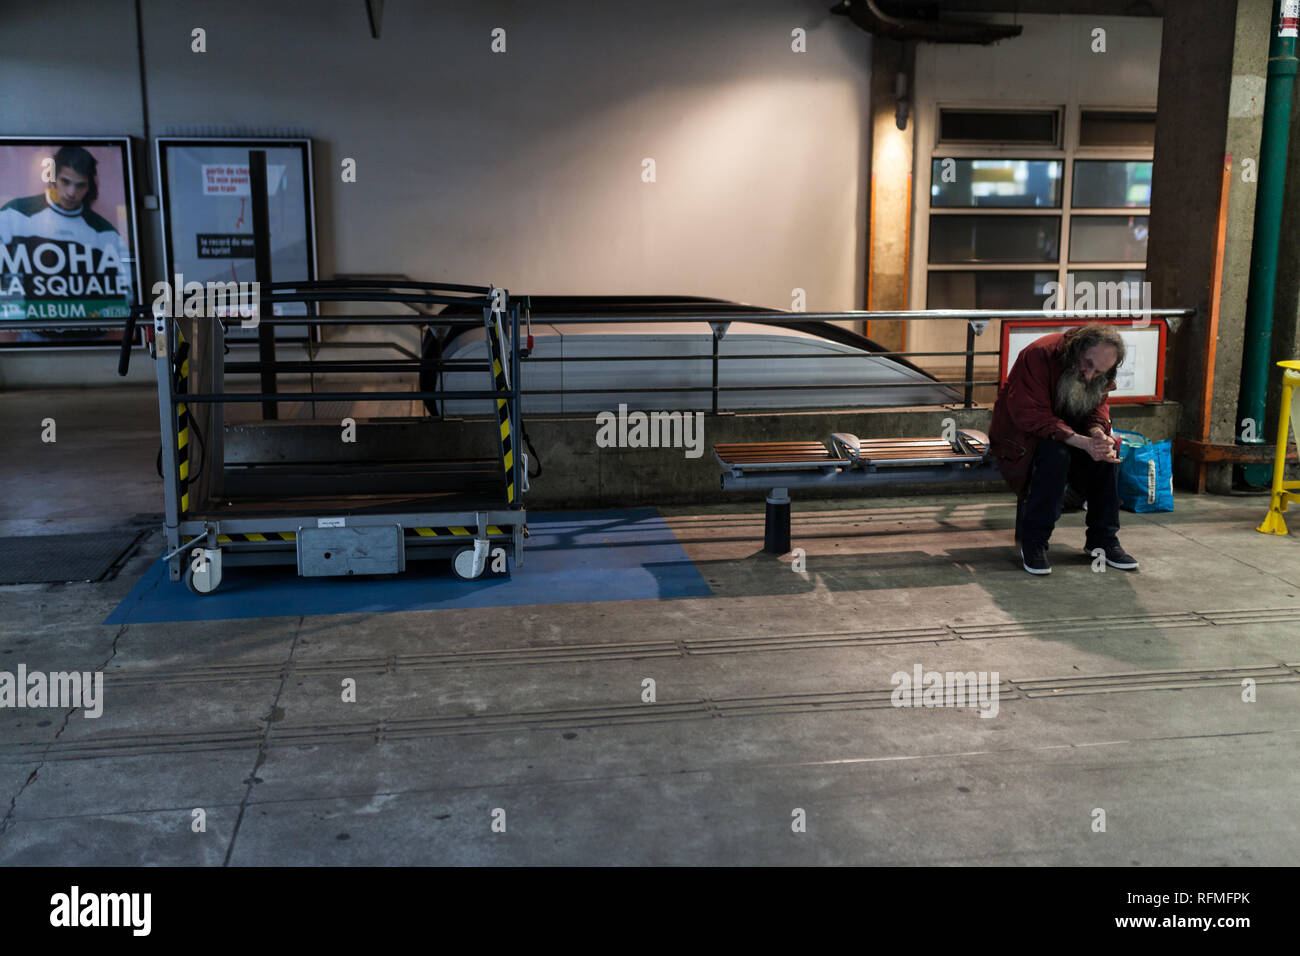 Paris, France - may 27, 2018: Anti soccial homeless sitting on the bench in railway station Montparnass. Stock Photo